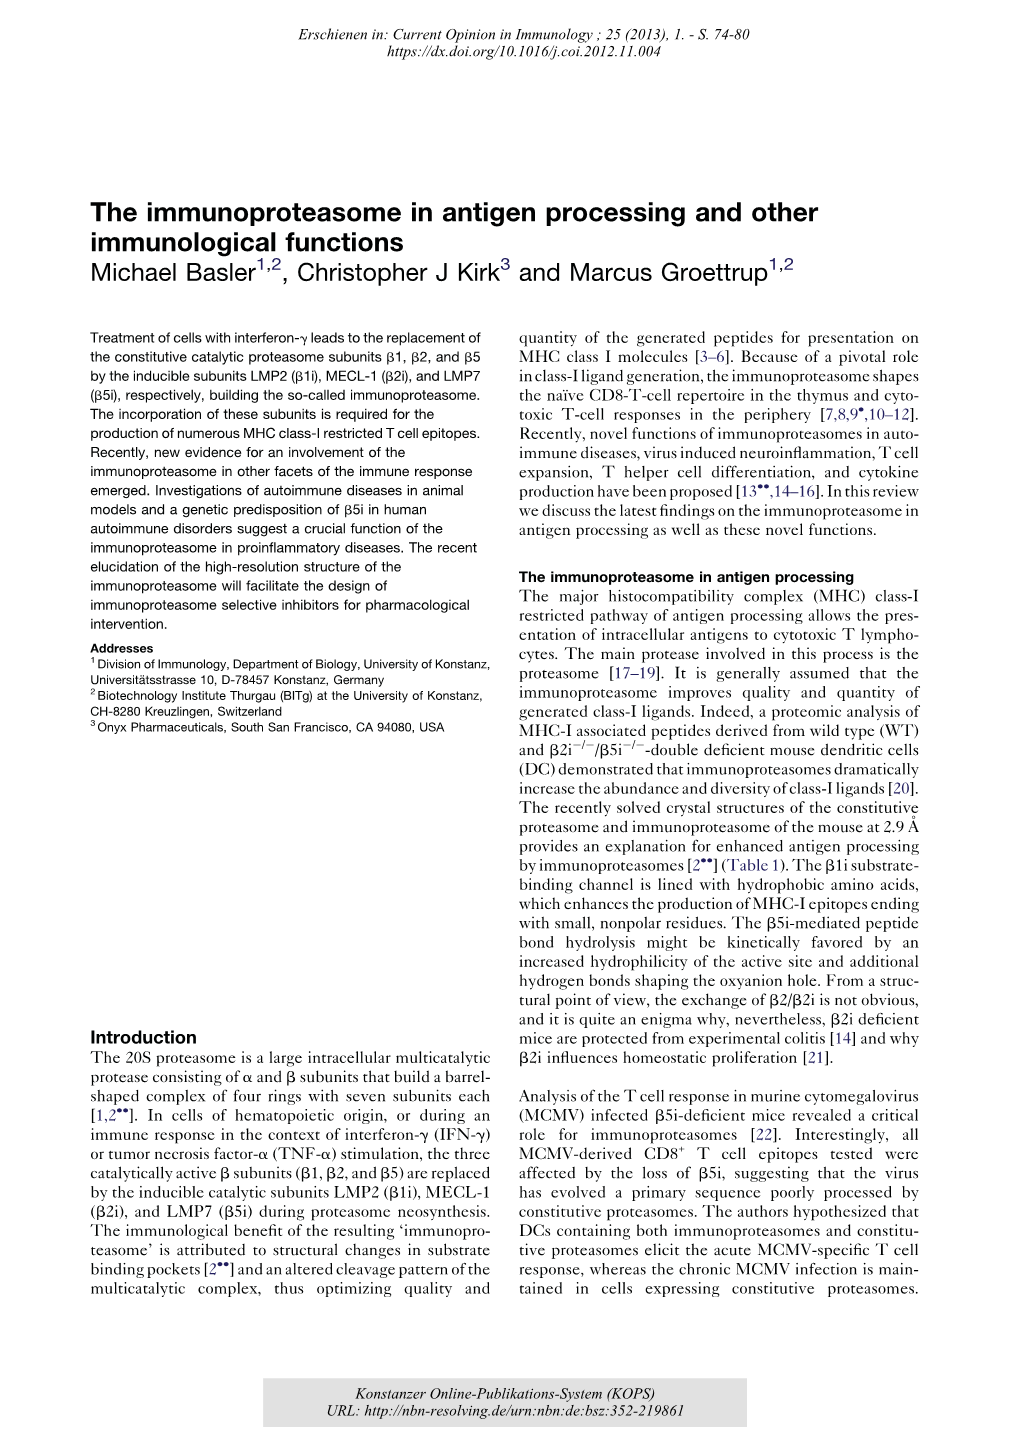 The Immunoproteasome in Antigen Processing and Other